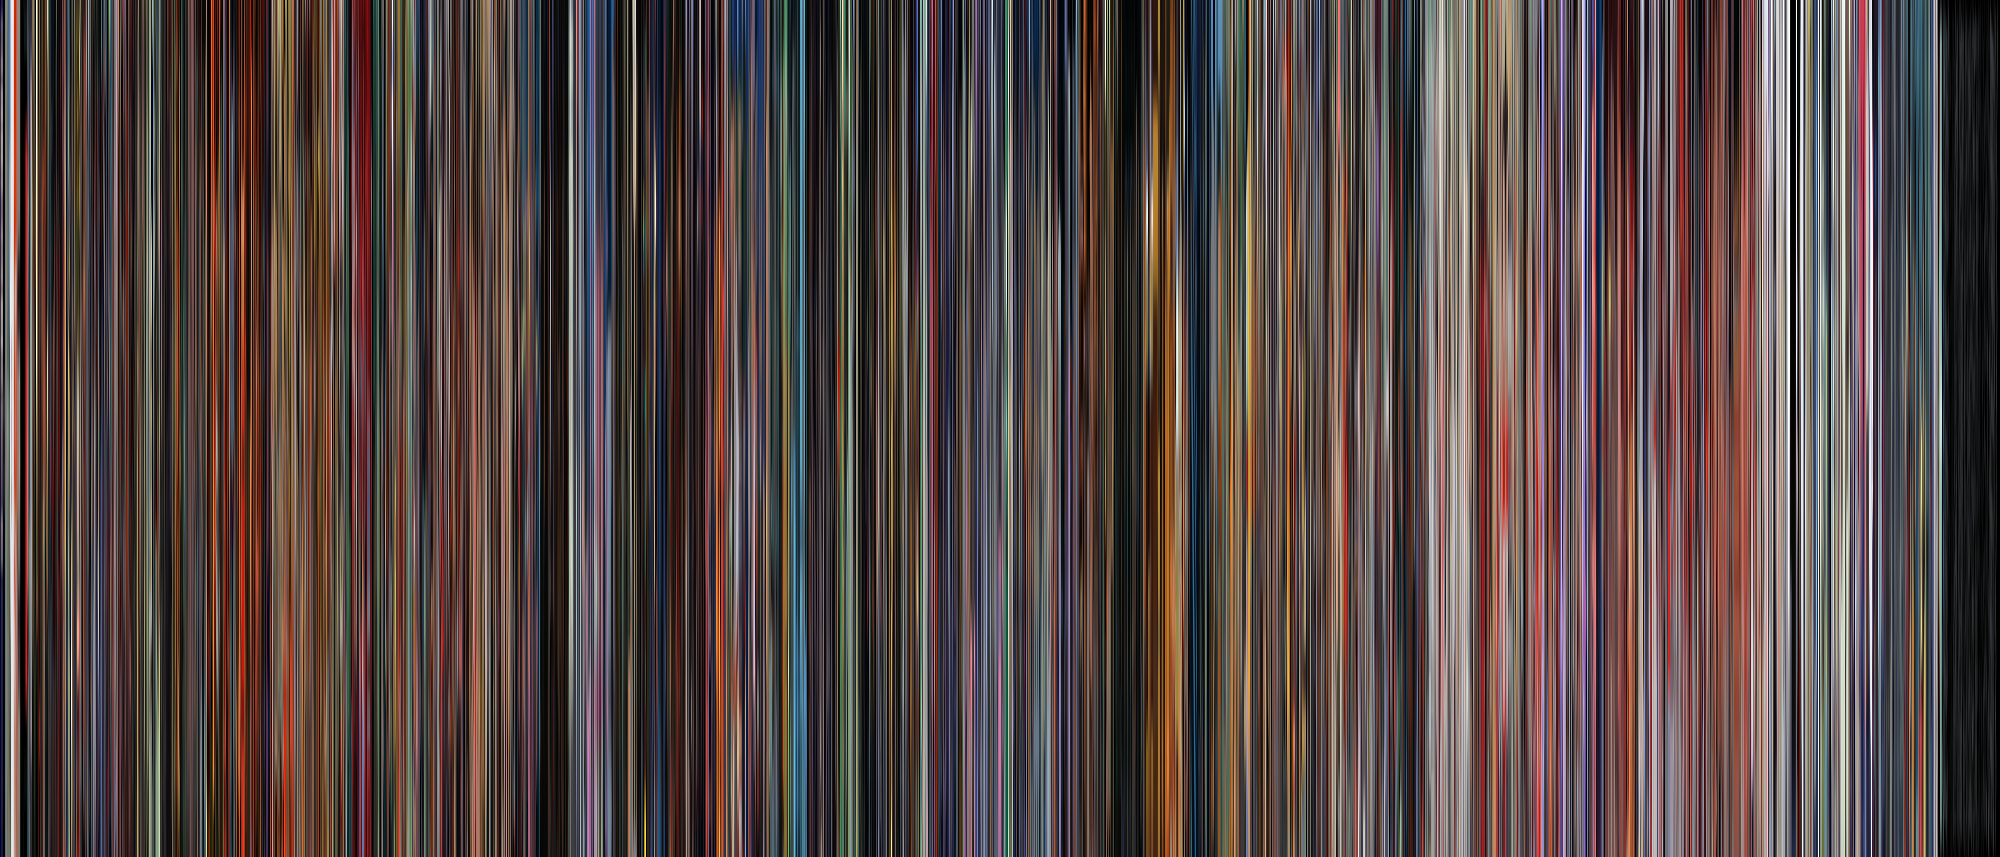 Akira barcode, generated with smoothing set to 10 at 7467 x 3200 and scaled down to 2000.